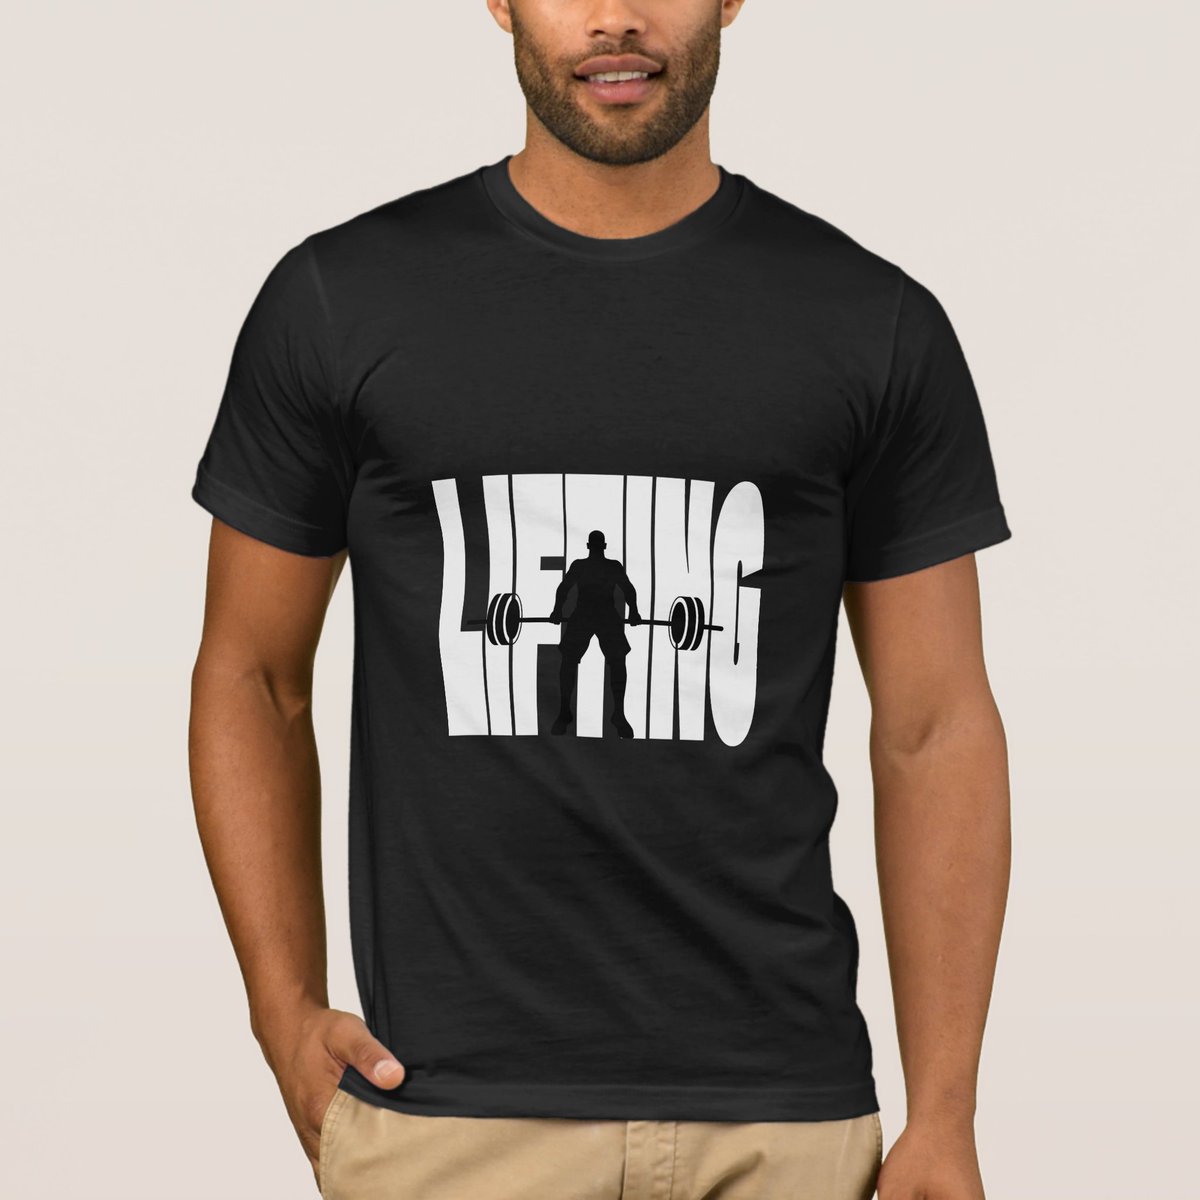 Lifting / Men's Sport-Tek Competitor T-Shirt

Find This Design And More On Our Online Zazzle Store Here :
zazzle.com/lifting_t_shir…

#gym #gymmotivation #gymaddict #gymshirts #workout #workoutmotivation #workouttshirt #onlinshopping #motivation #gymguy #bodybuilding #weightlifting